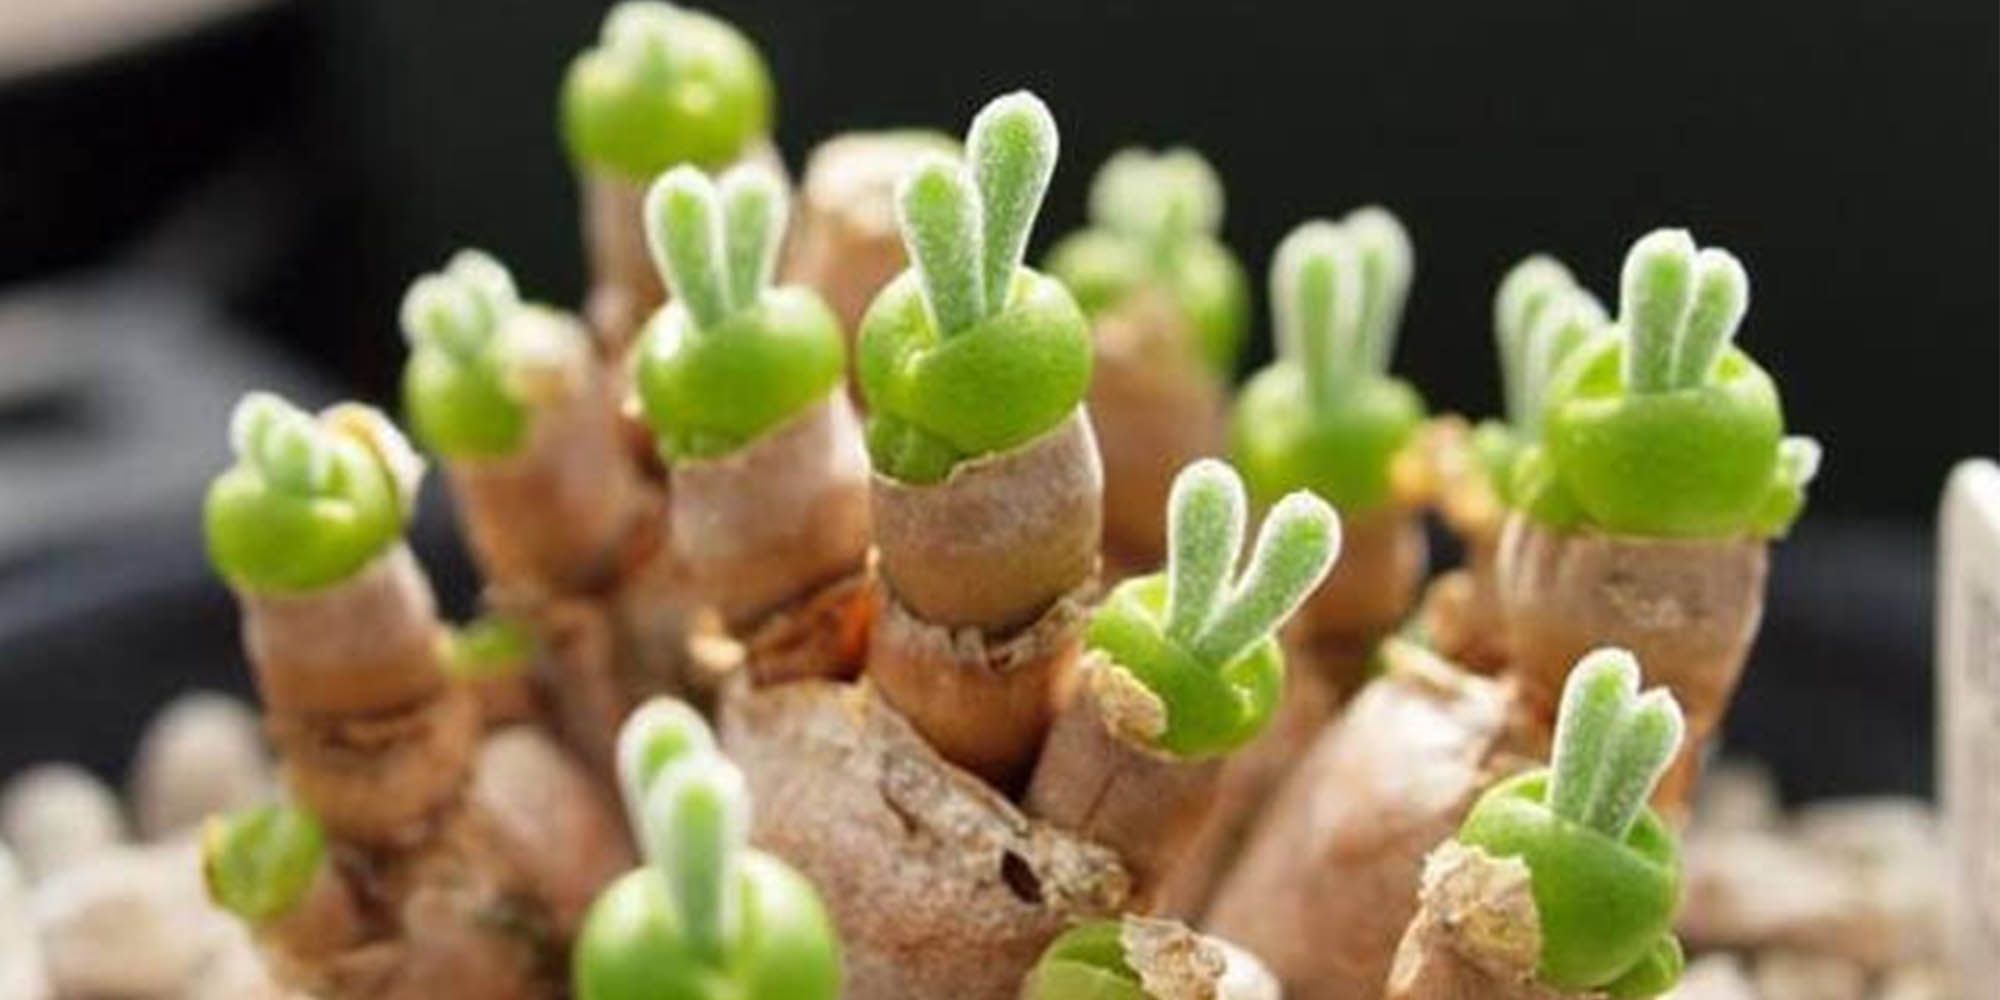 Bunny Succulents Are the Adorable Plants That Need to Hop Into Your Home